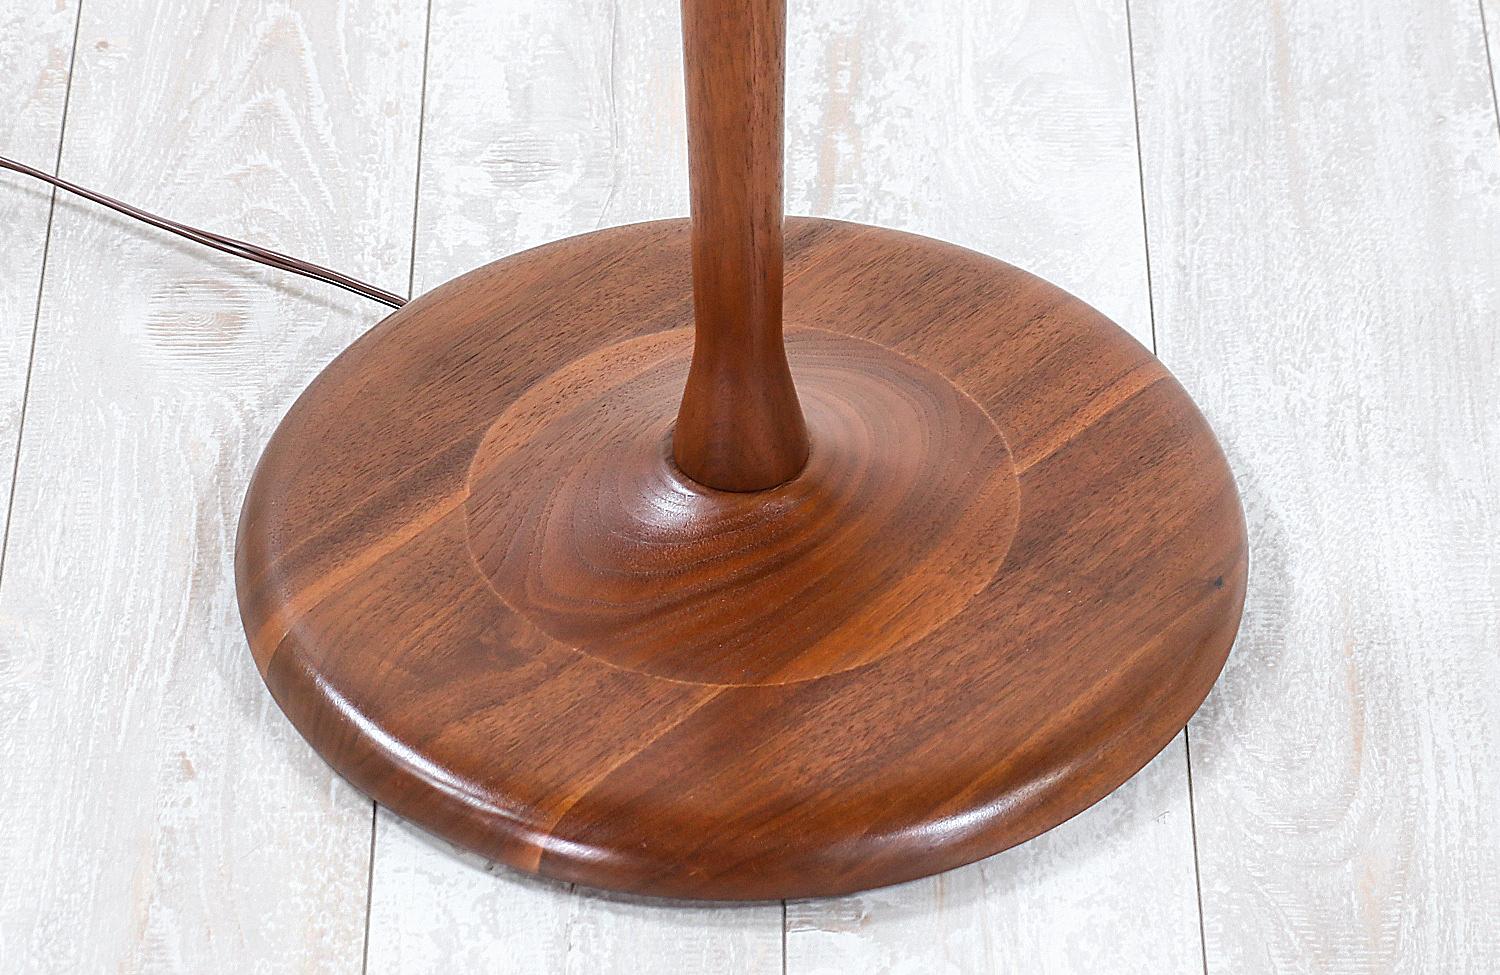 American Mid-Century Modern Sculpted Walnut Floor Lamp with Side Table by Laurel